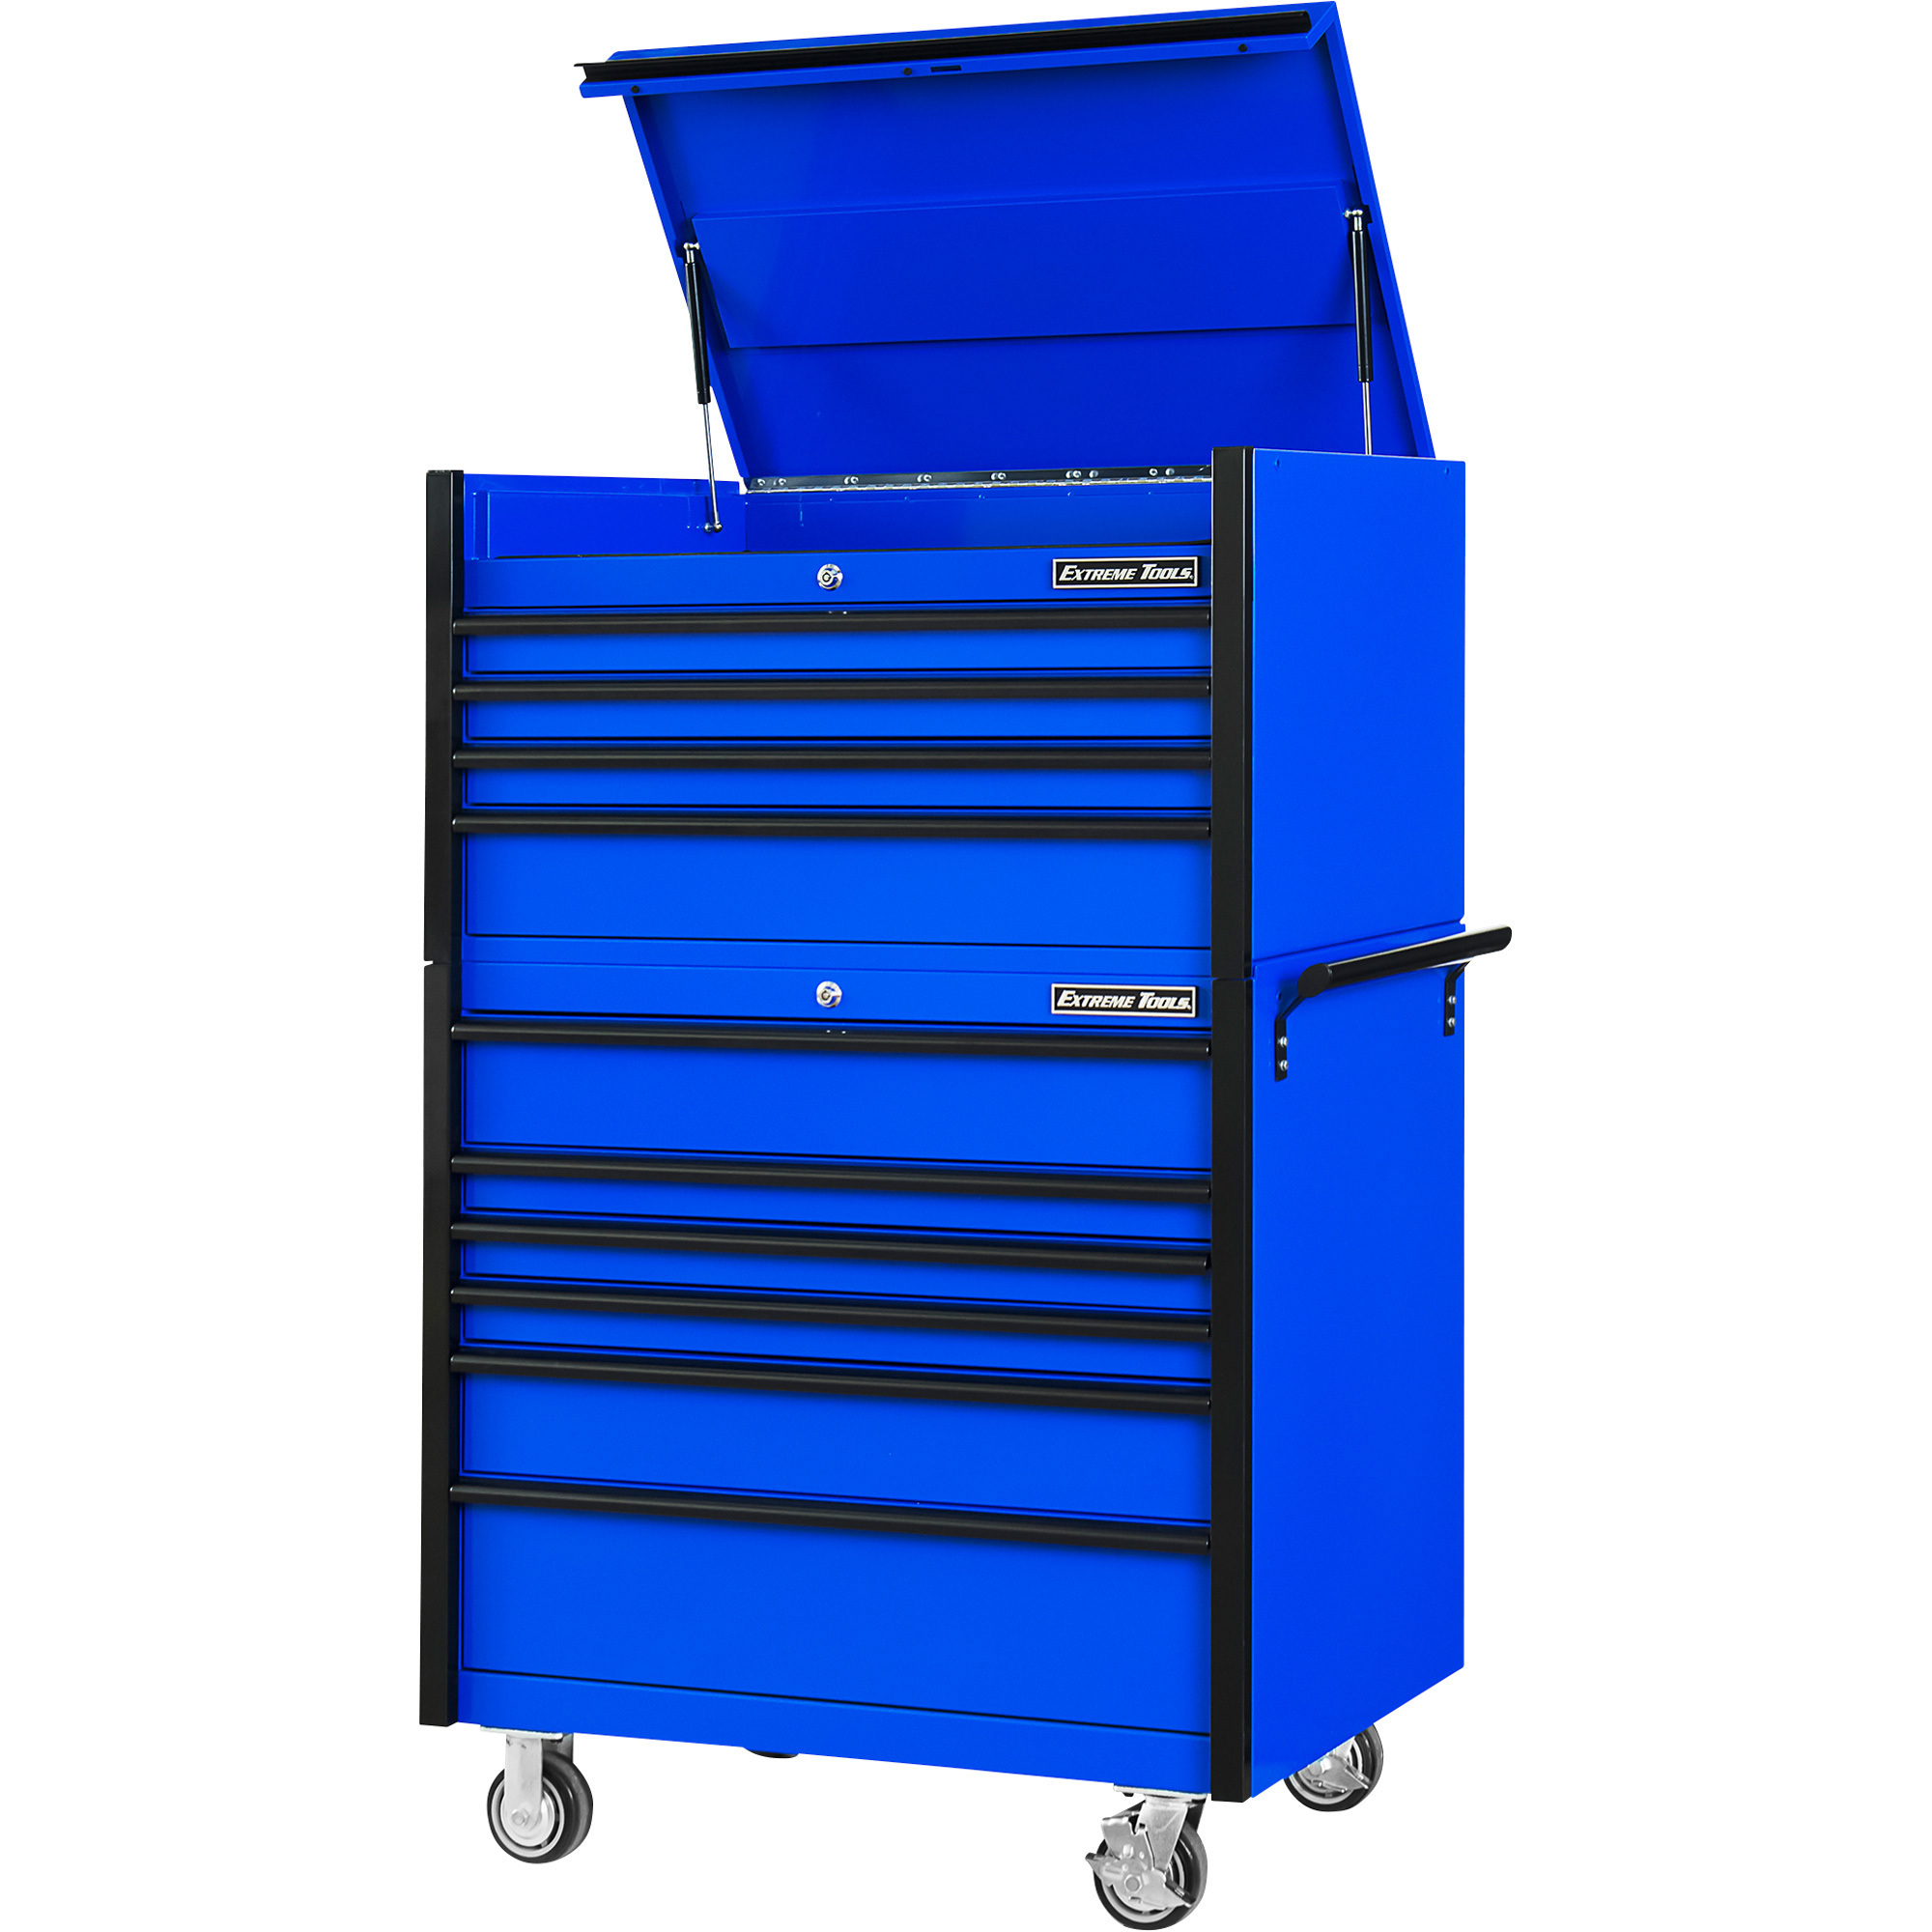 4-Drawer Top Chest/6-Drawer Roller Cabinet Combo — 41Inch W x 25Inch D x 64Inch H, Blue/Black, Model - Extreme Tools DX4110CRUK